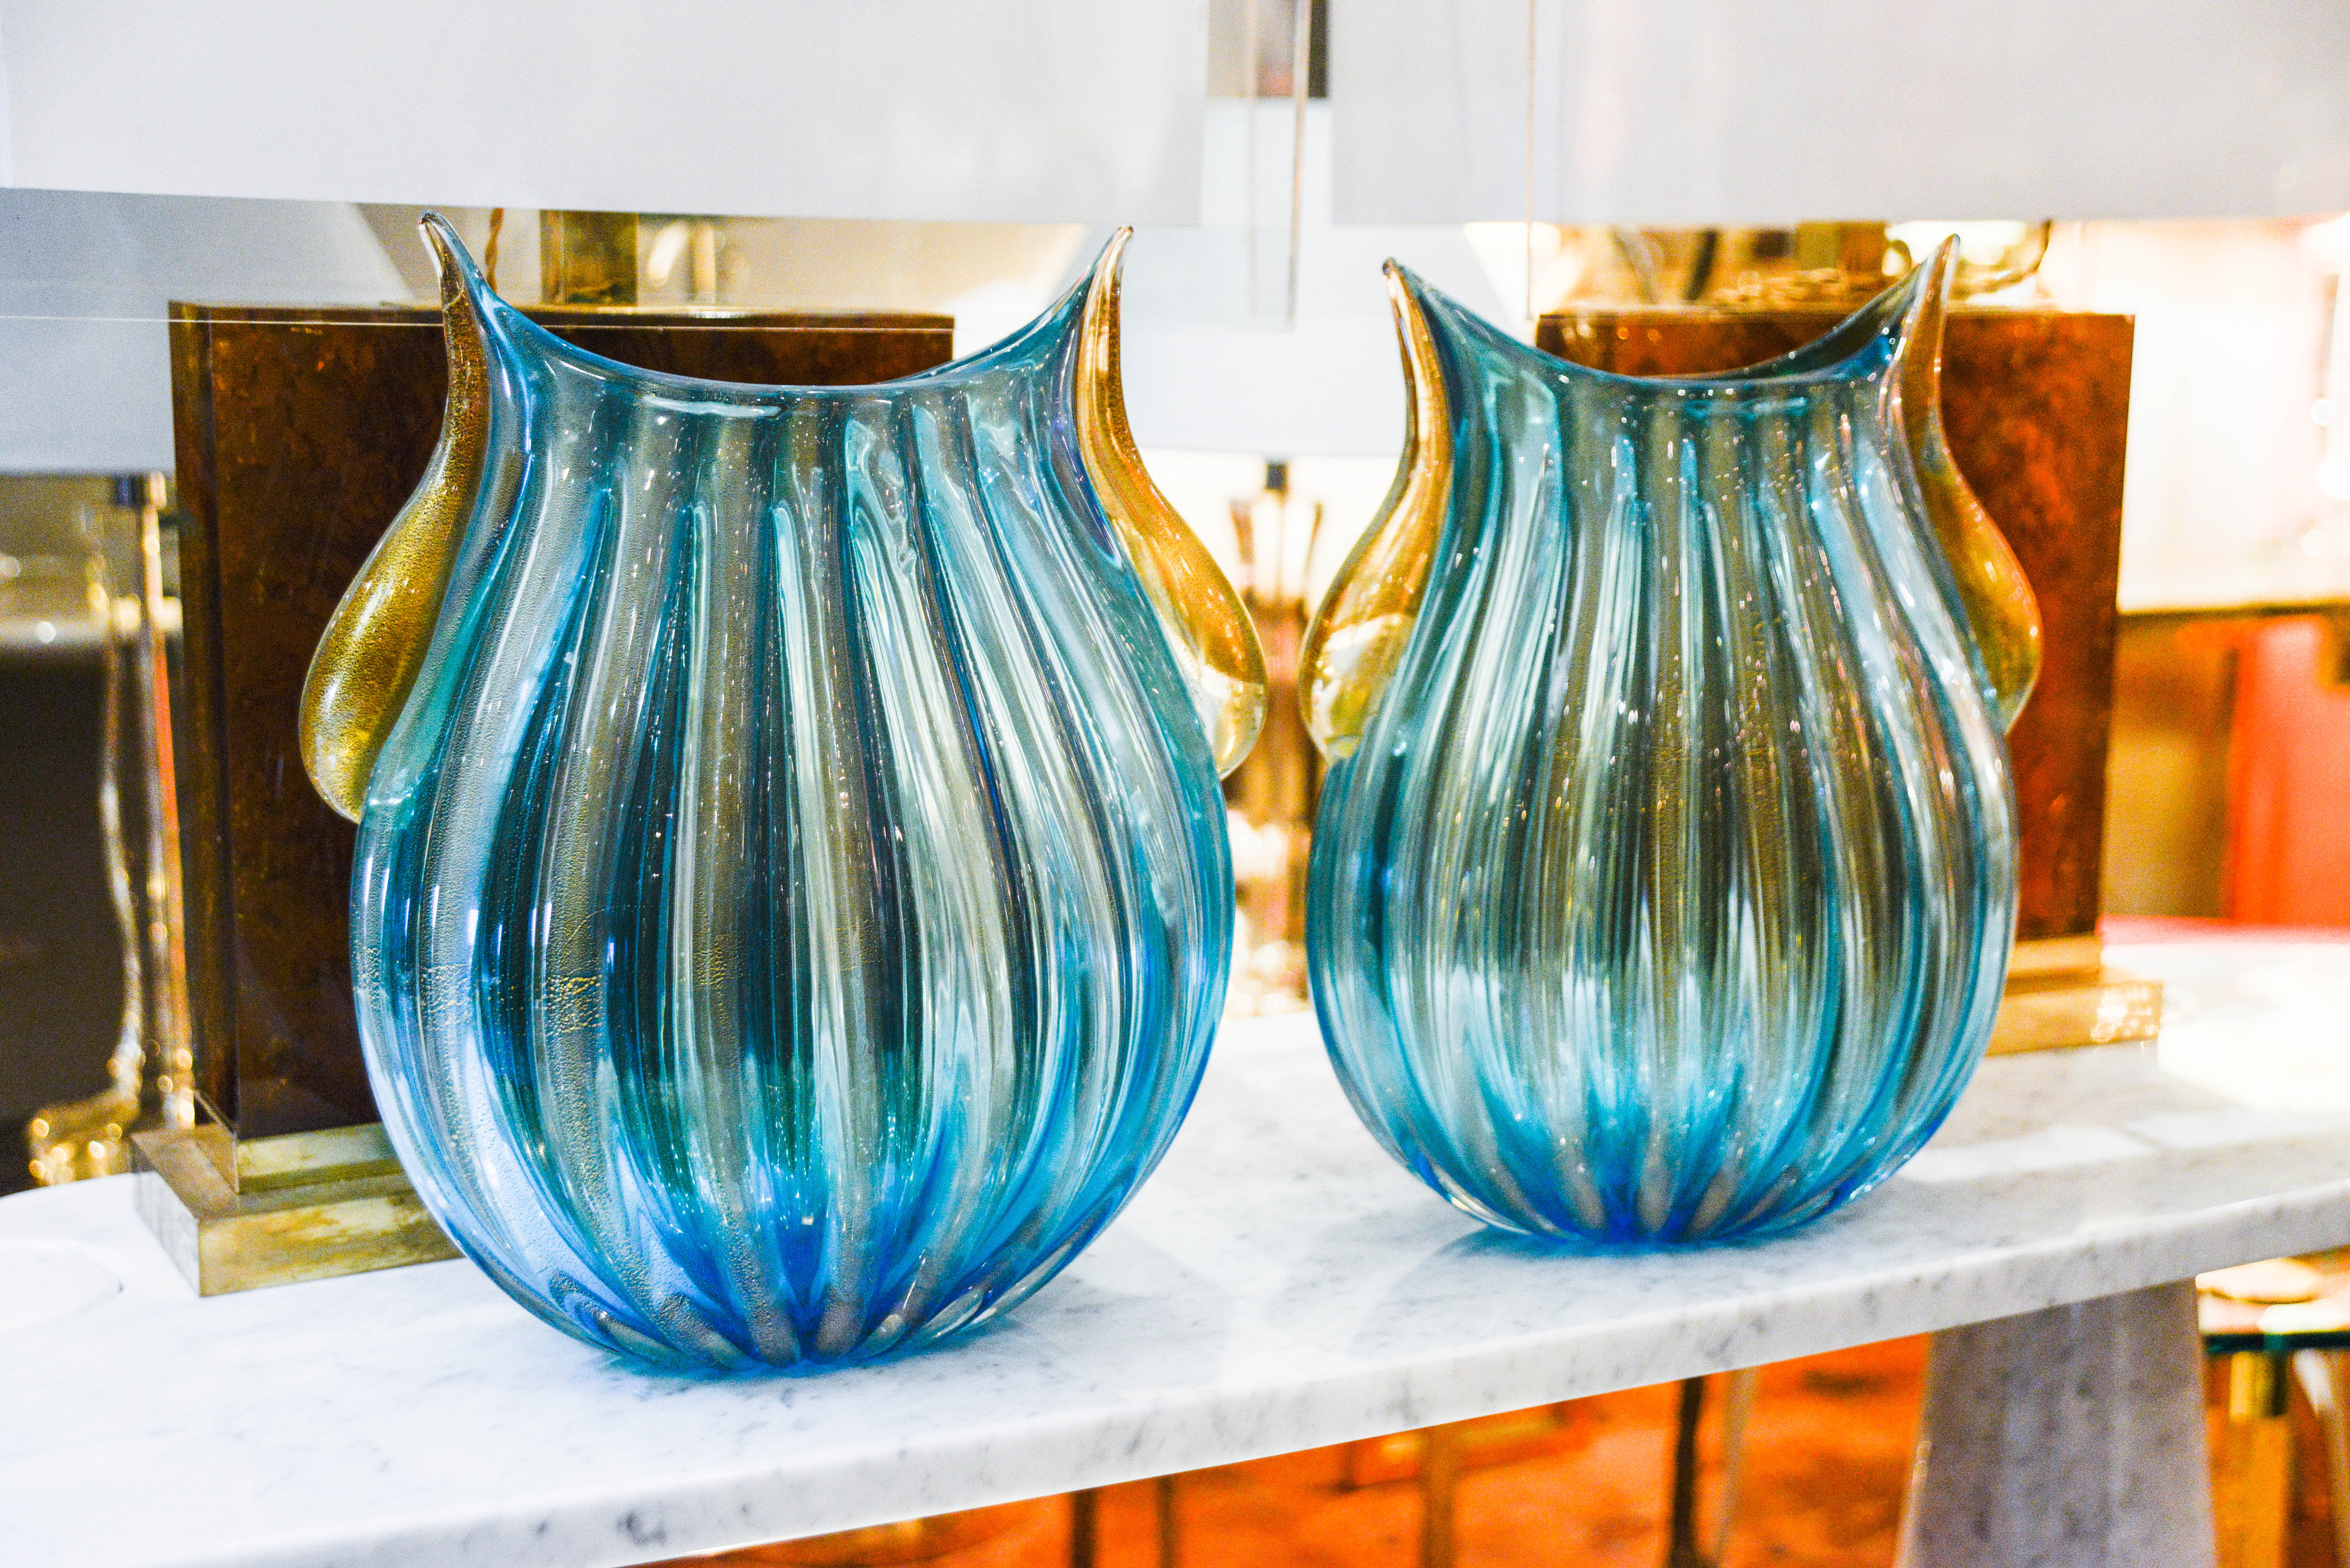 Pair of blue glass vases with golden leaves tears.